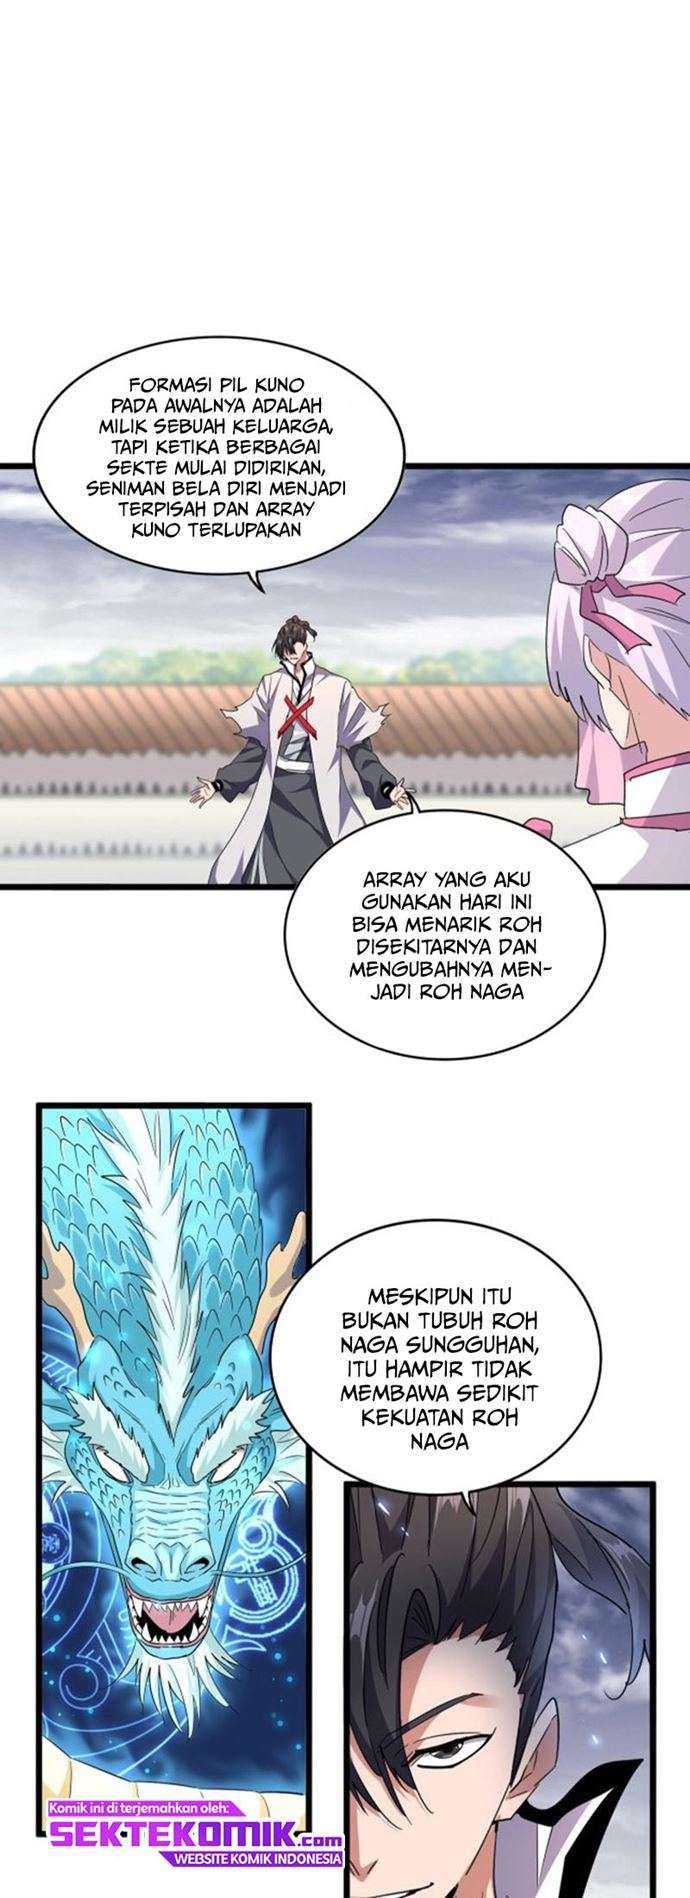 Magic Emperor Chapter 184 Image 3